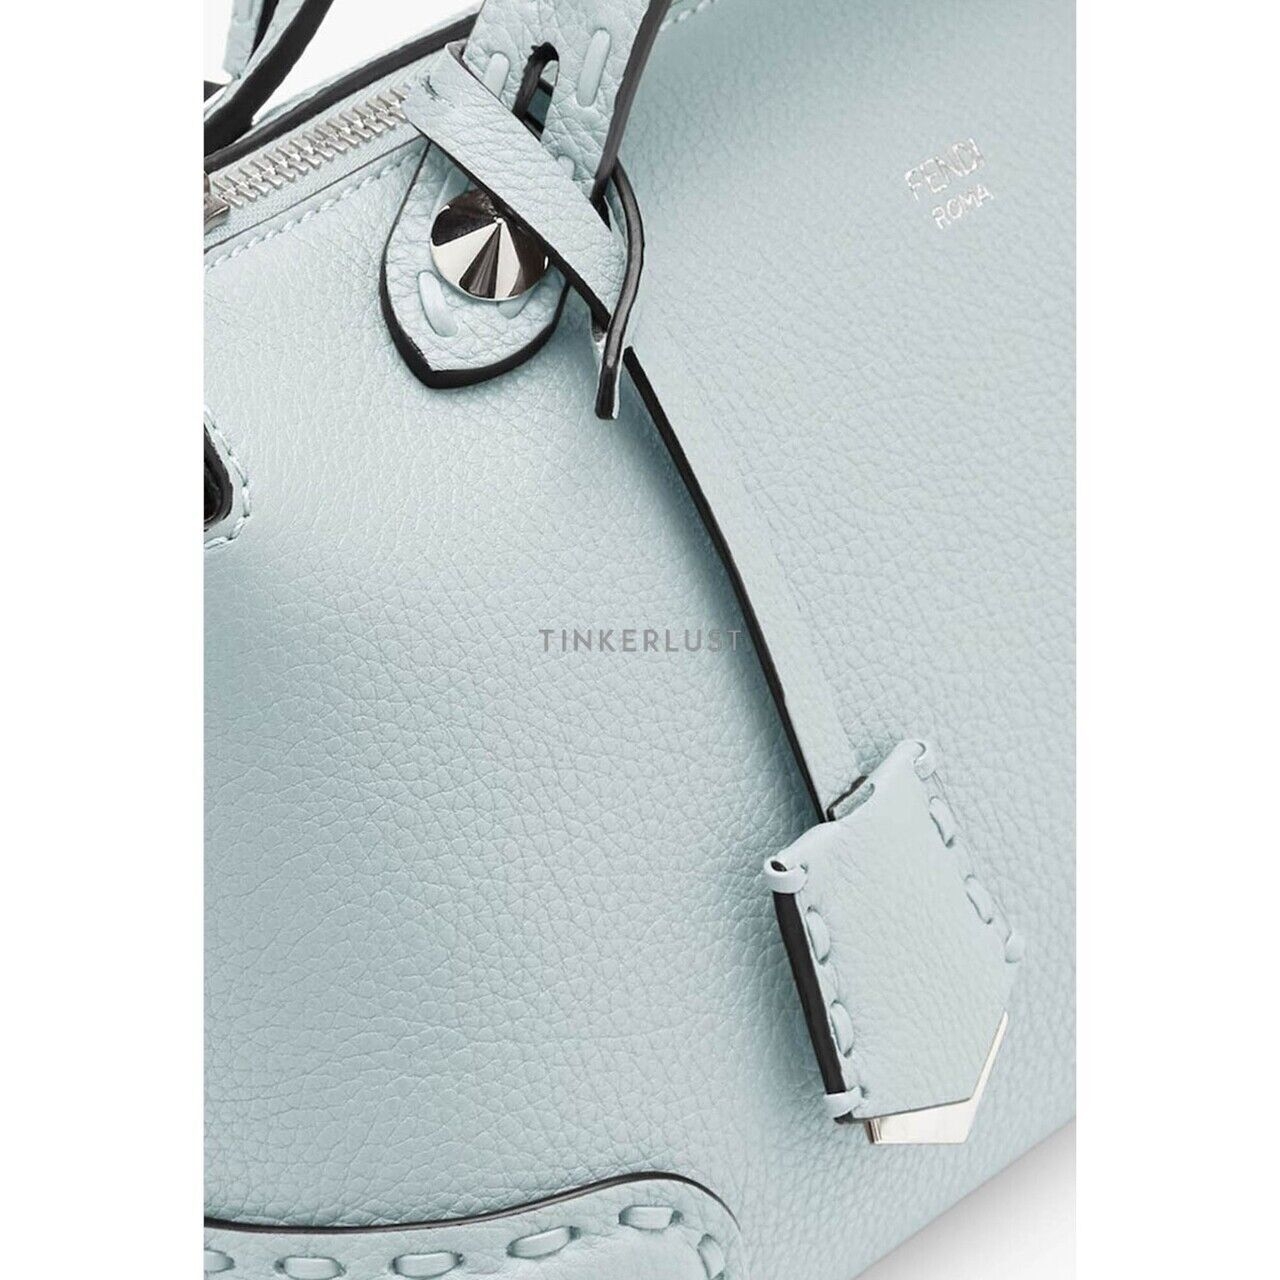 Fendi Small Selleria By The Way in Light Blue Leather